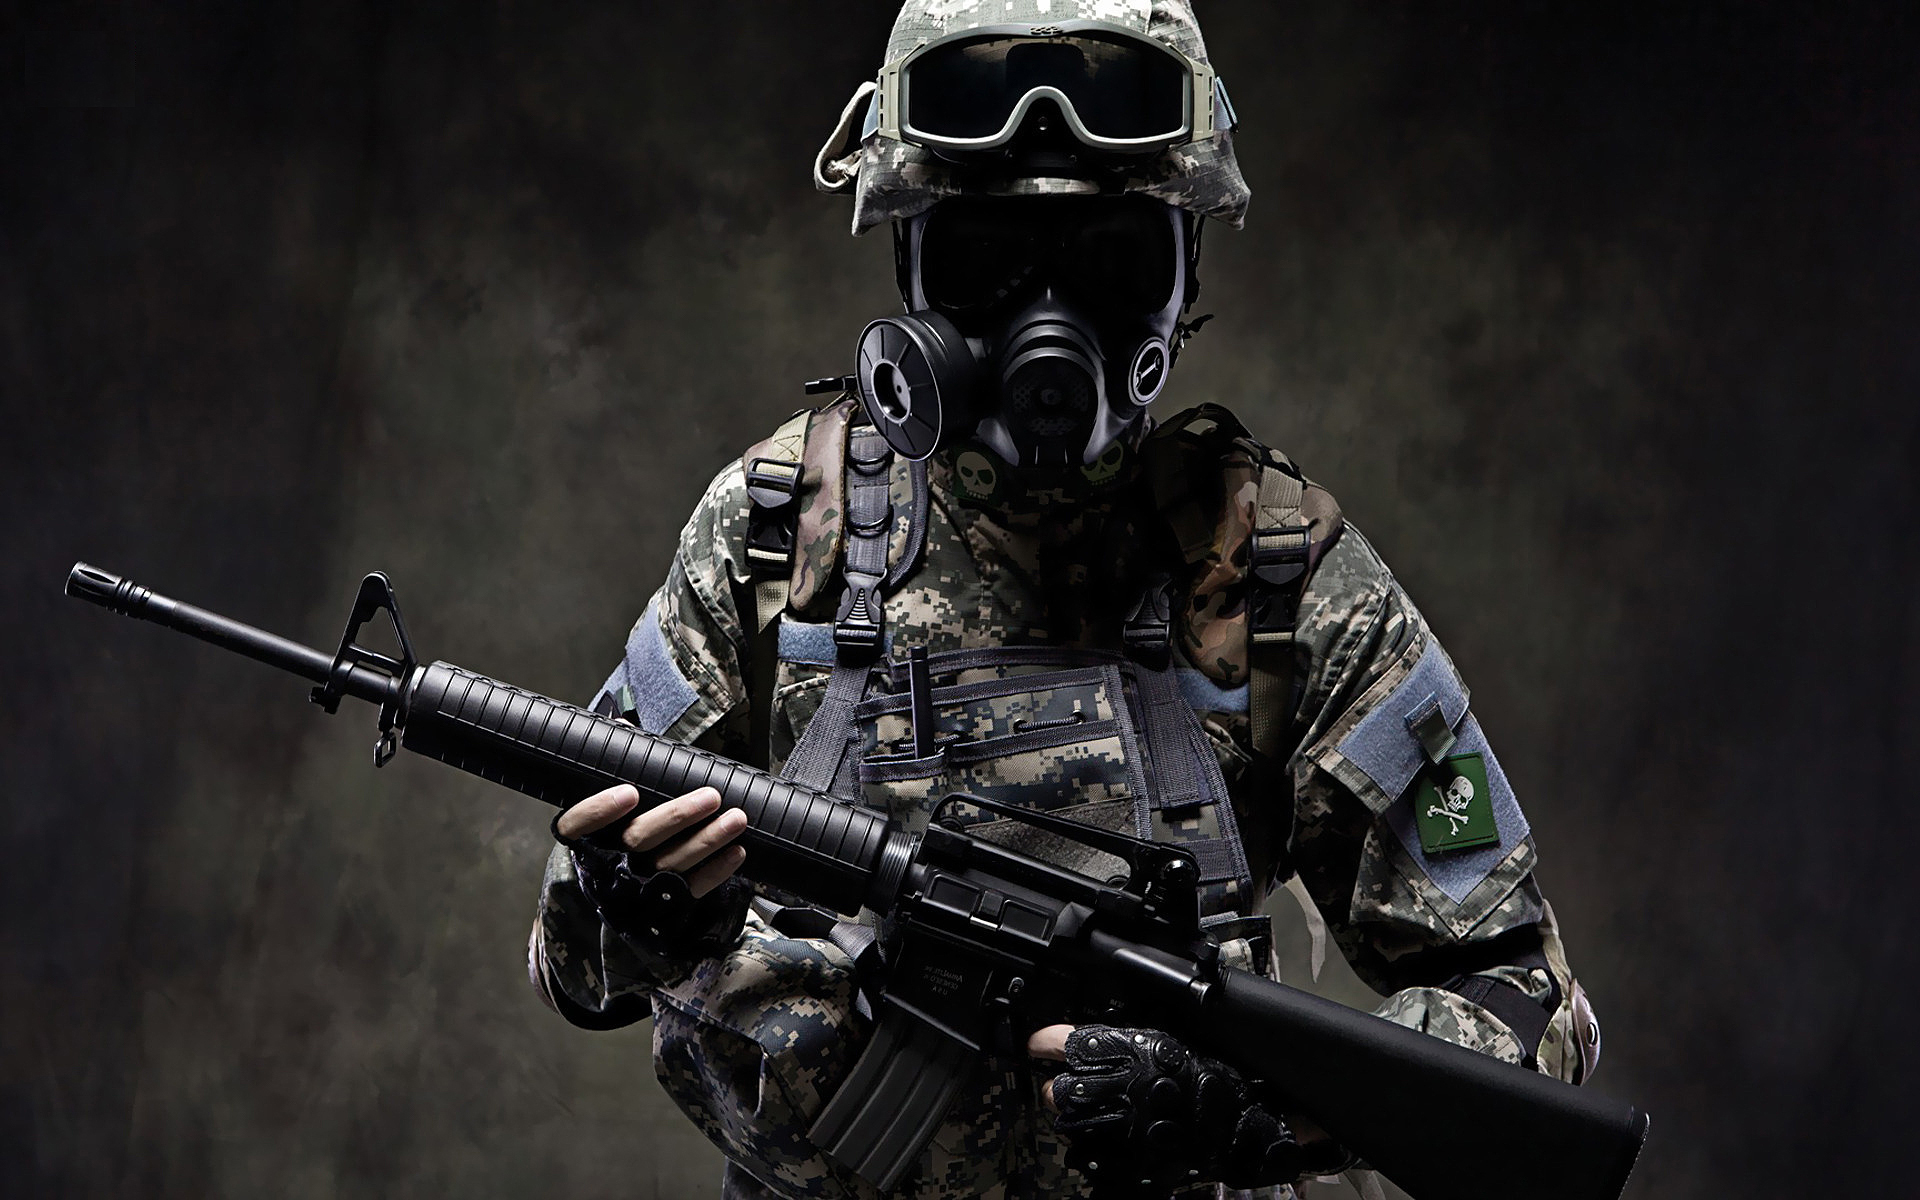 counter strike wallpaper,soldier,gun,personal protective equipment,military,army